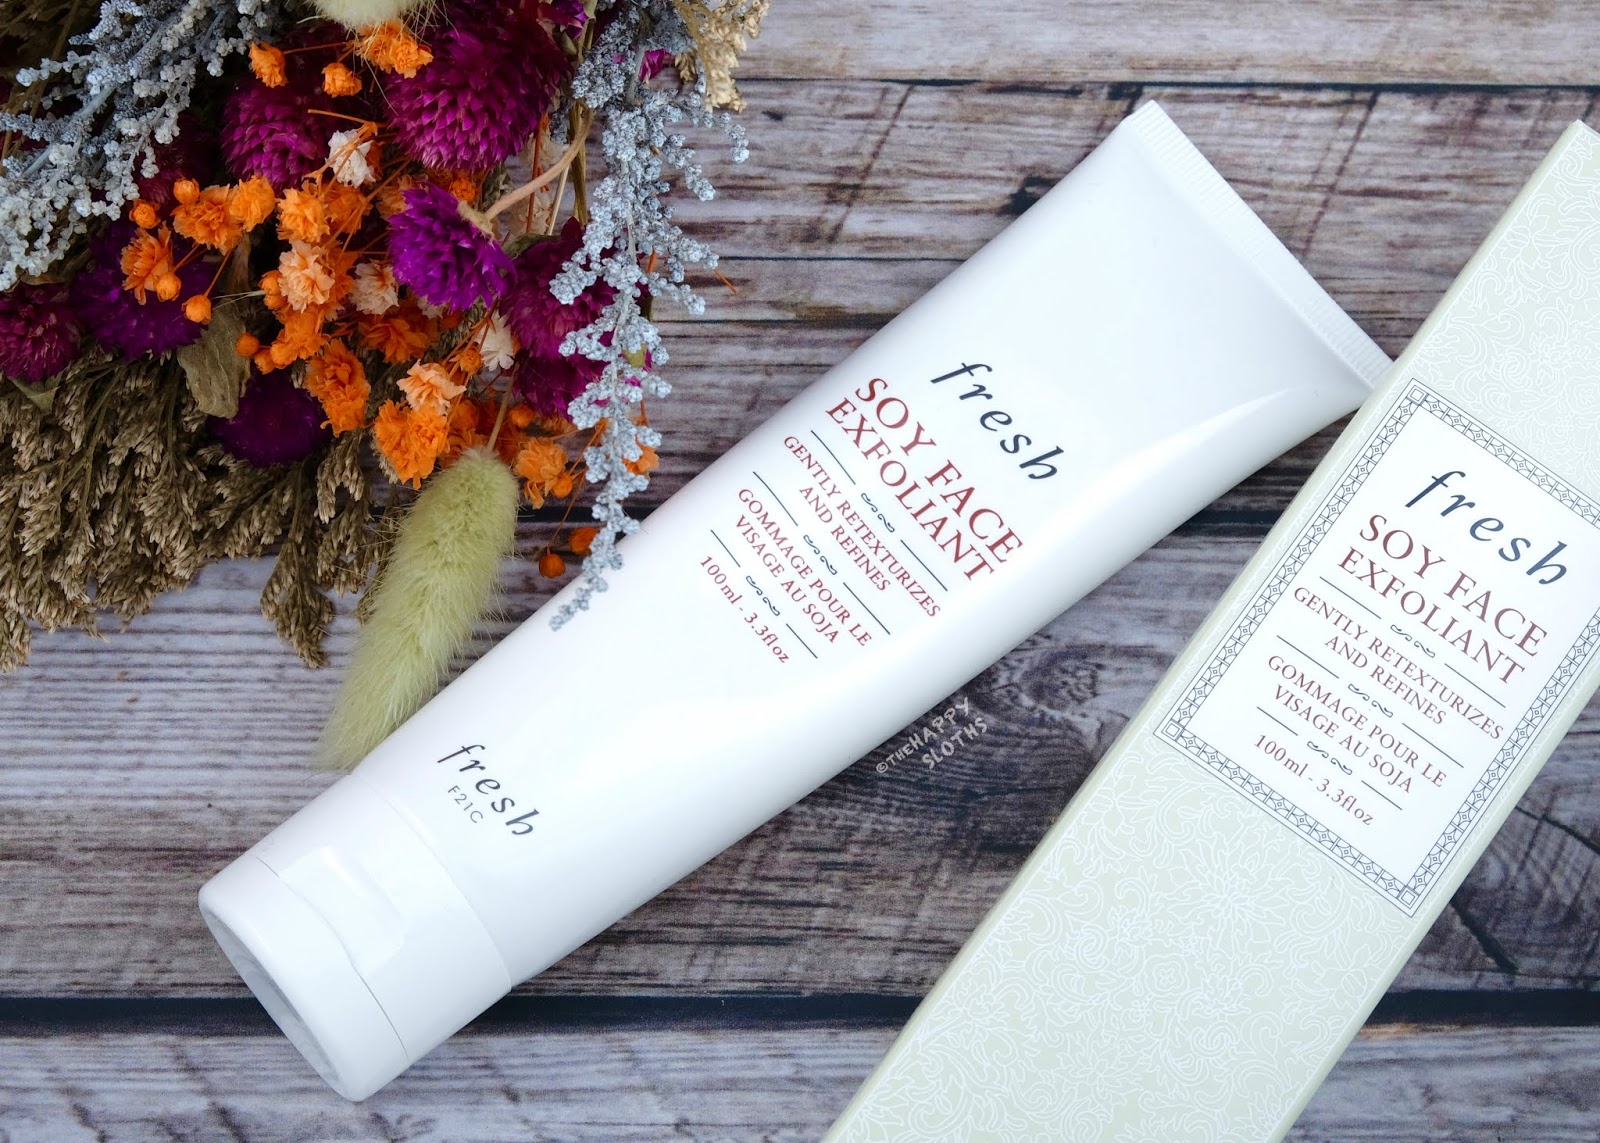 Fresh | Soy Face Exfoliant: Review